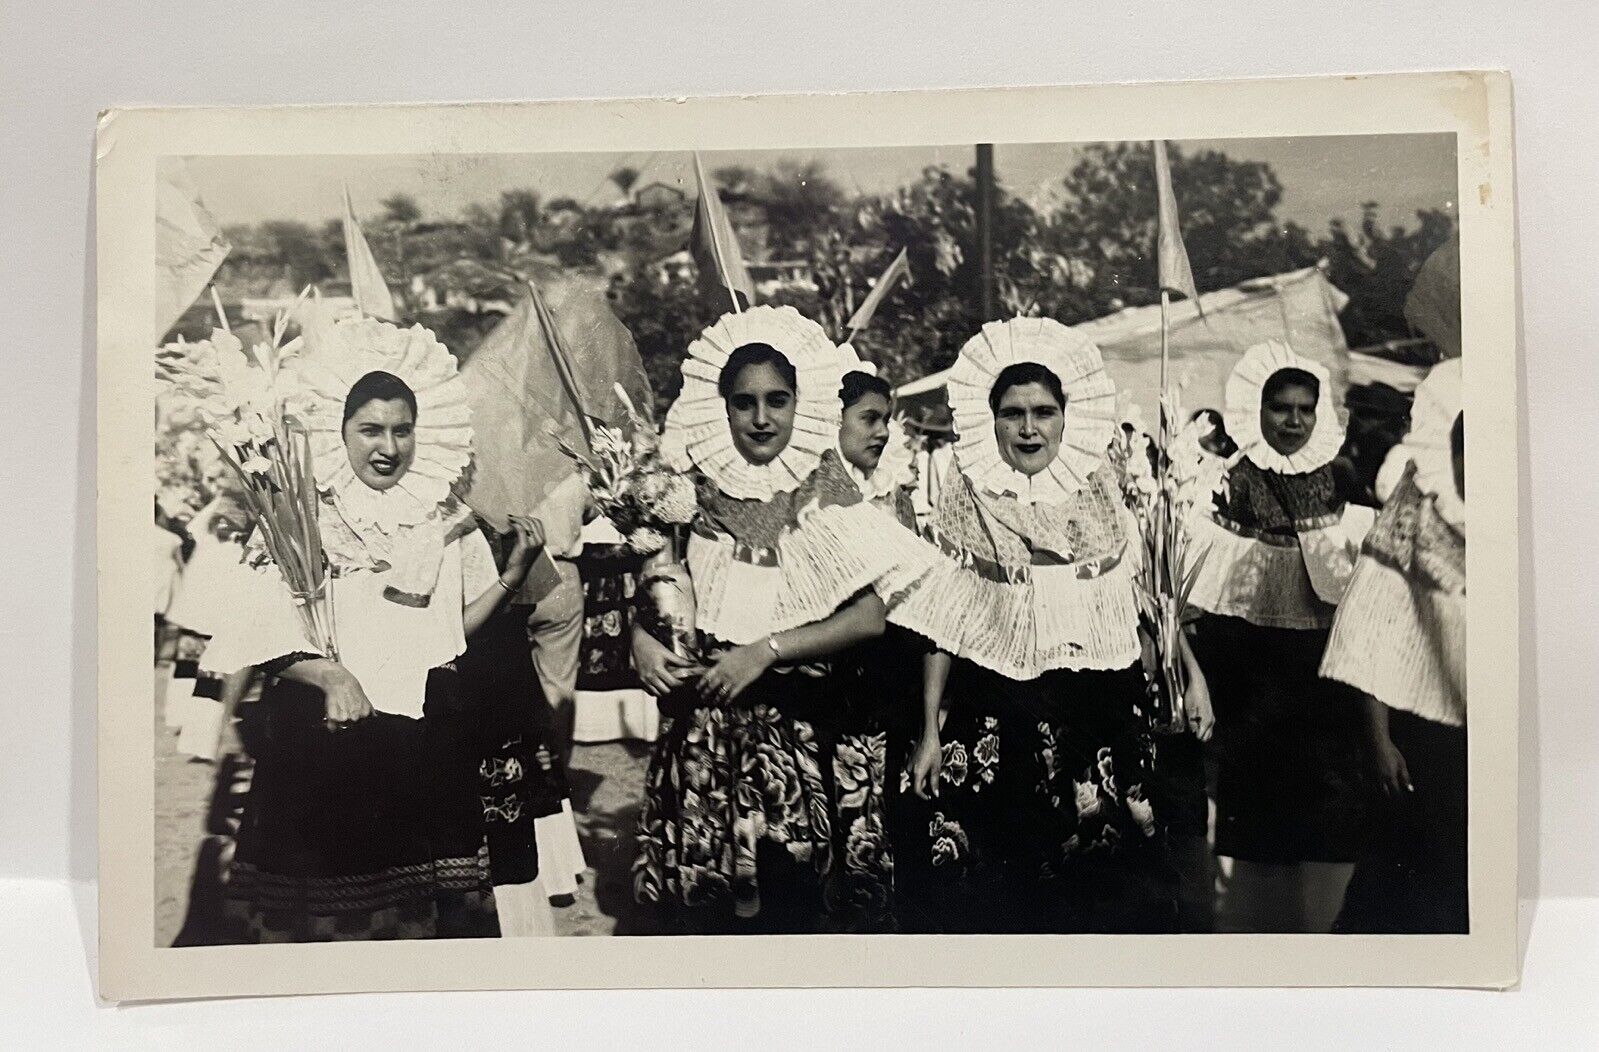 Day Of The Dead. Flower costumes. Gladiolas. Real Photo Postcard.